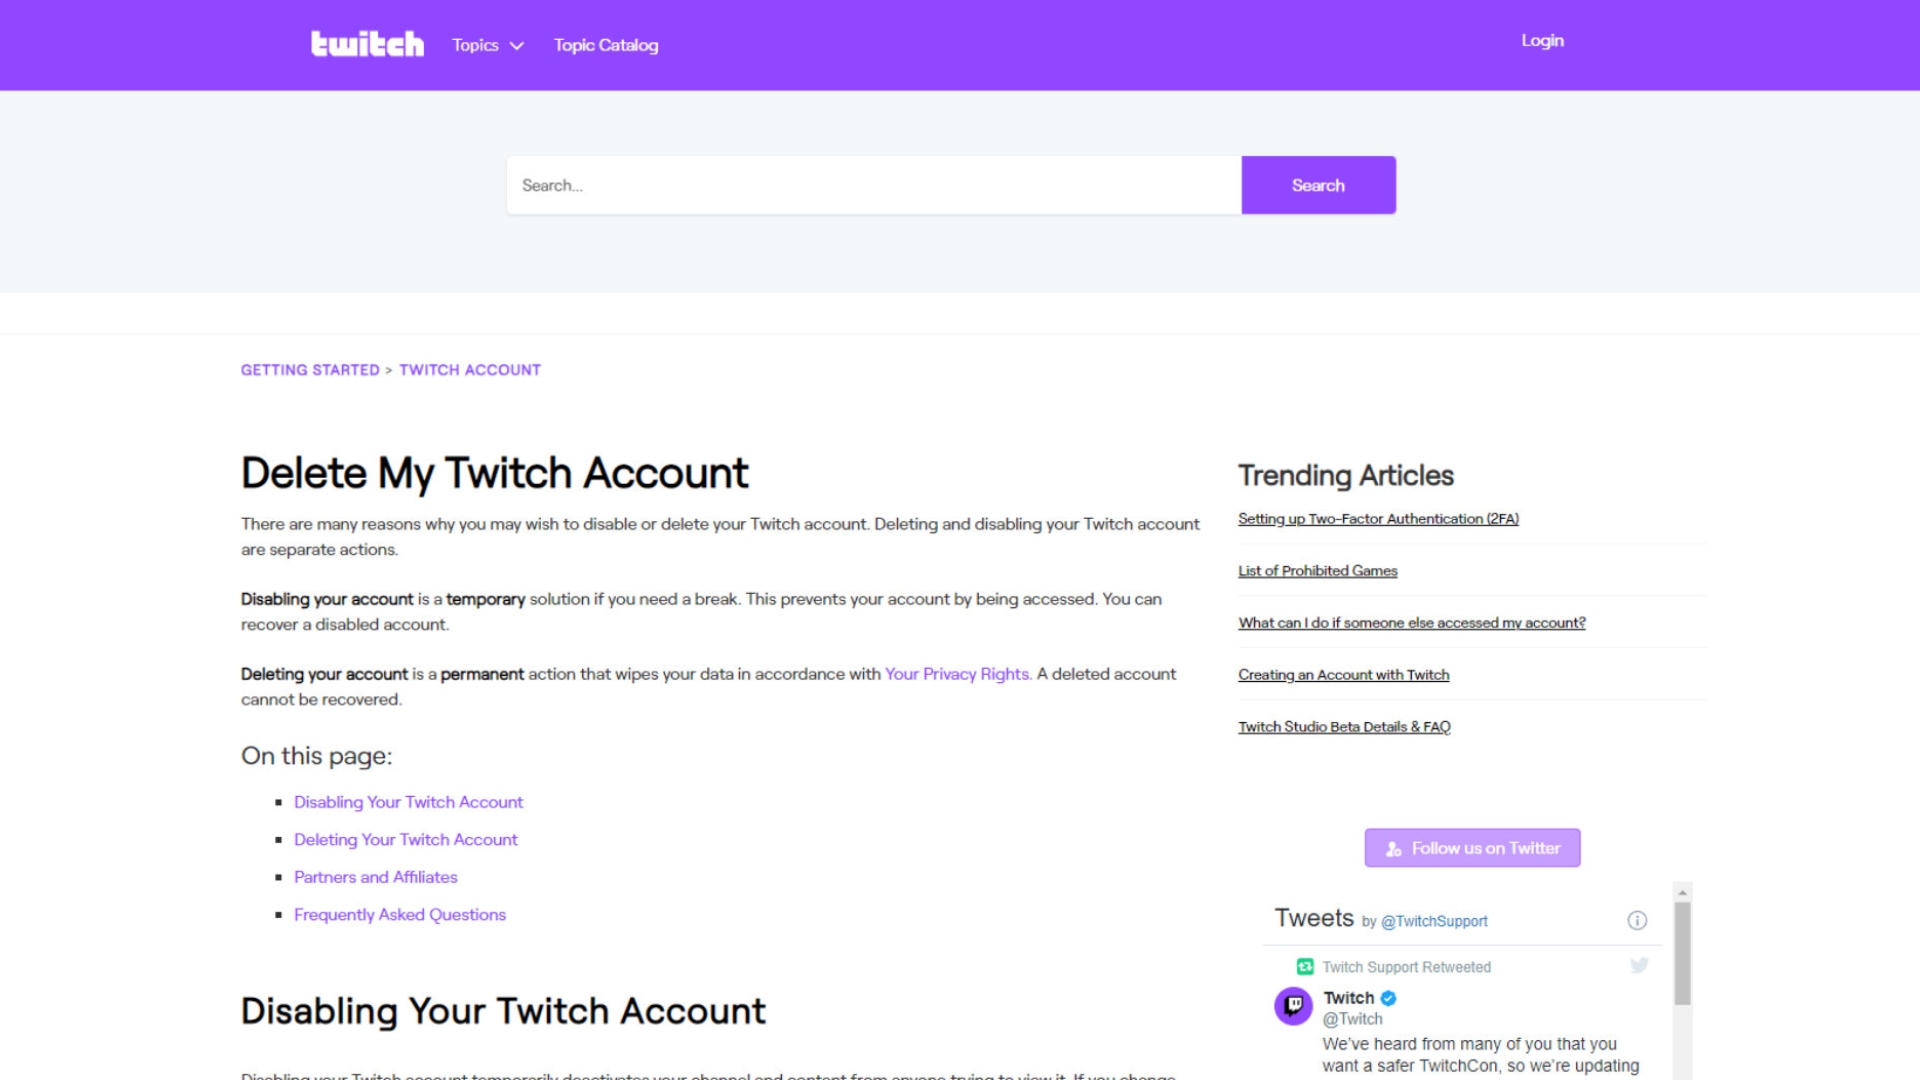 Creating an Account with Twitch